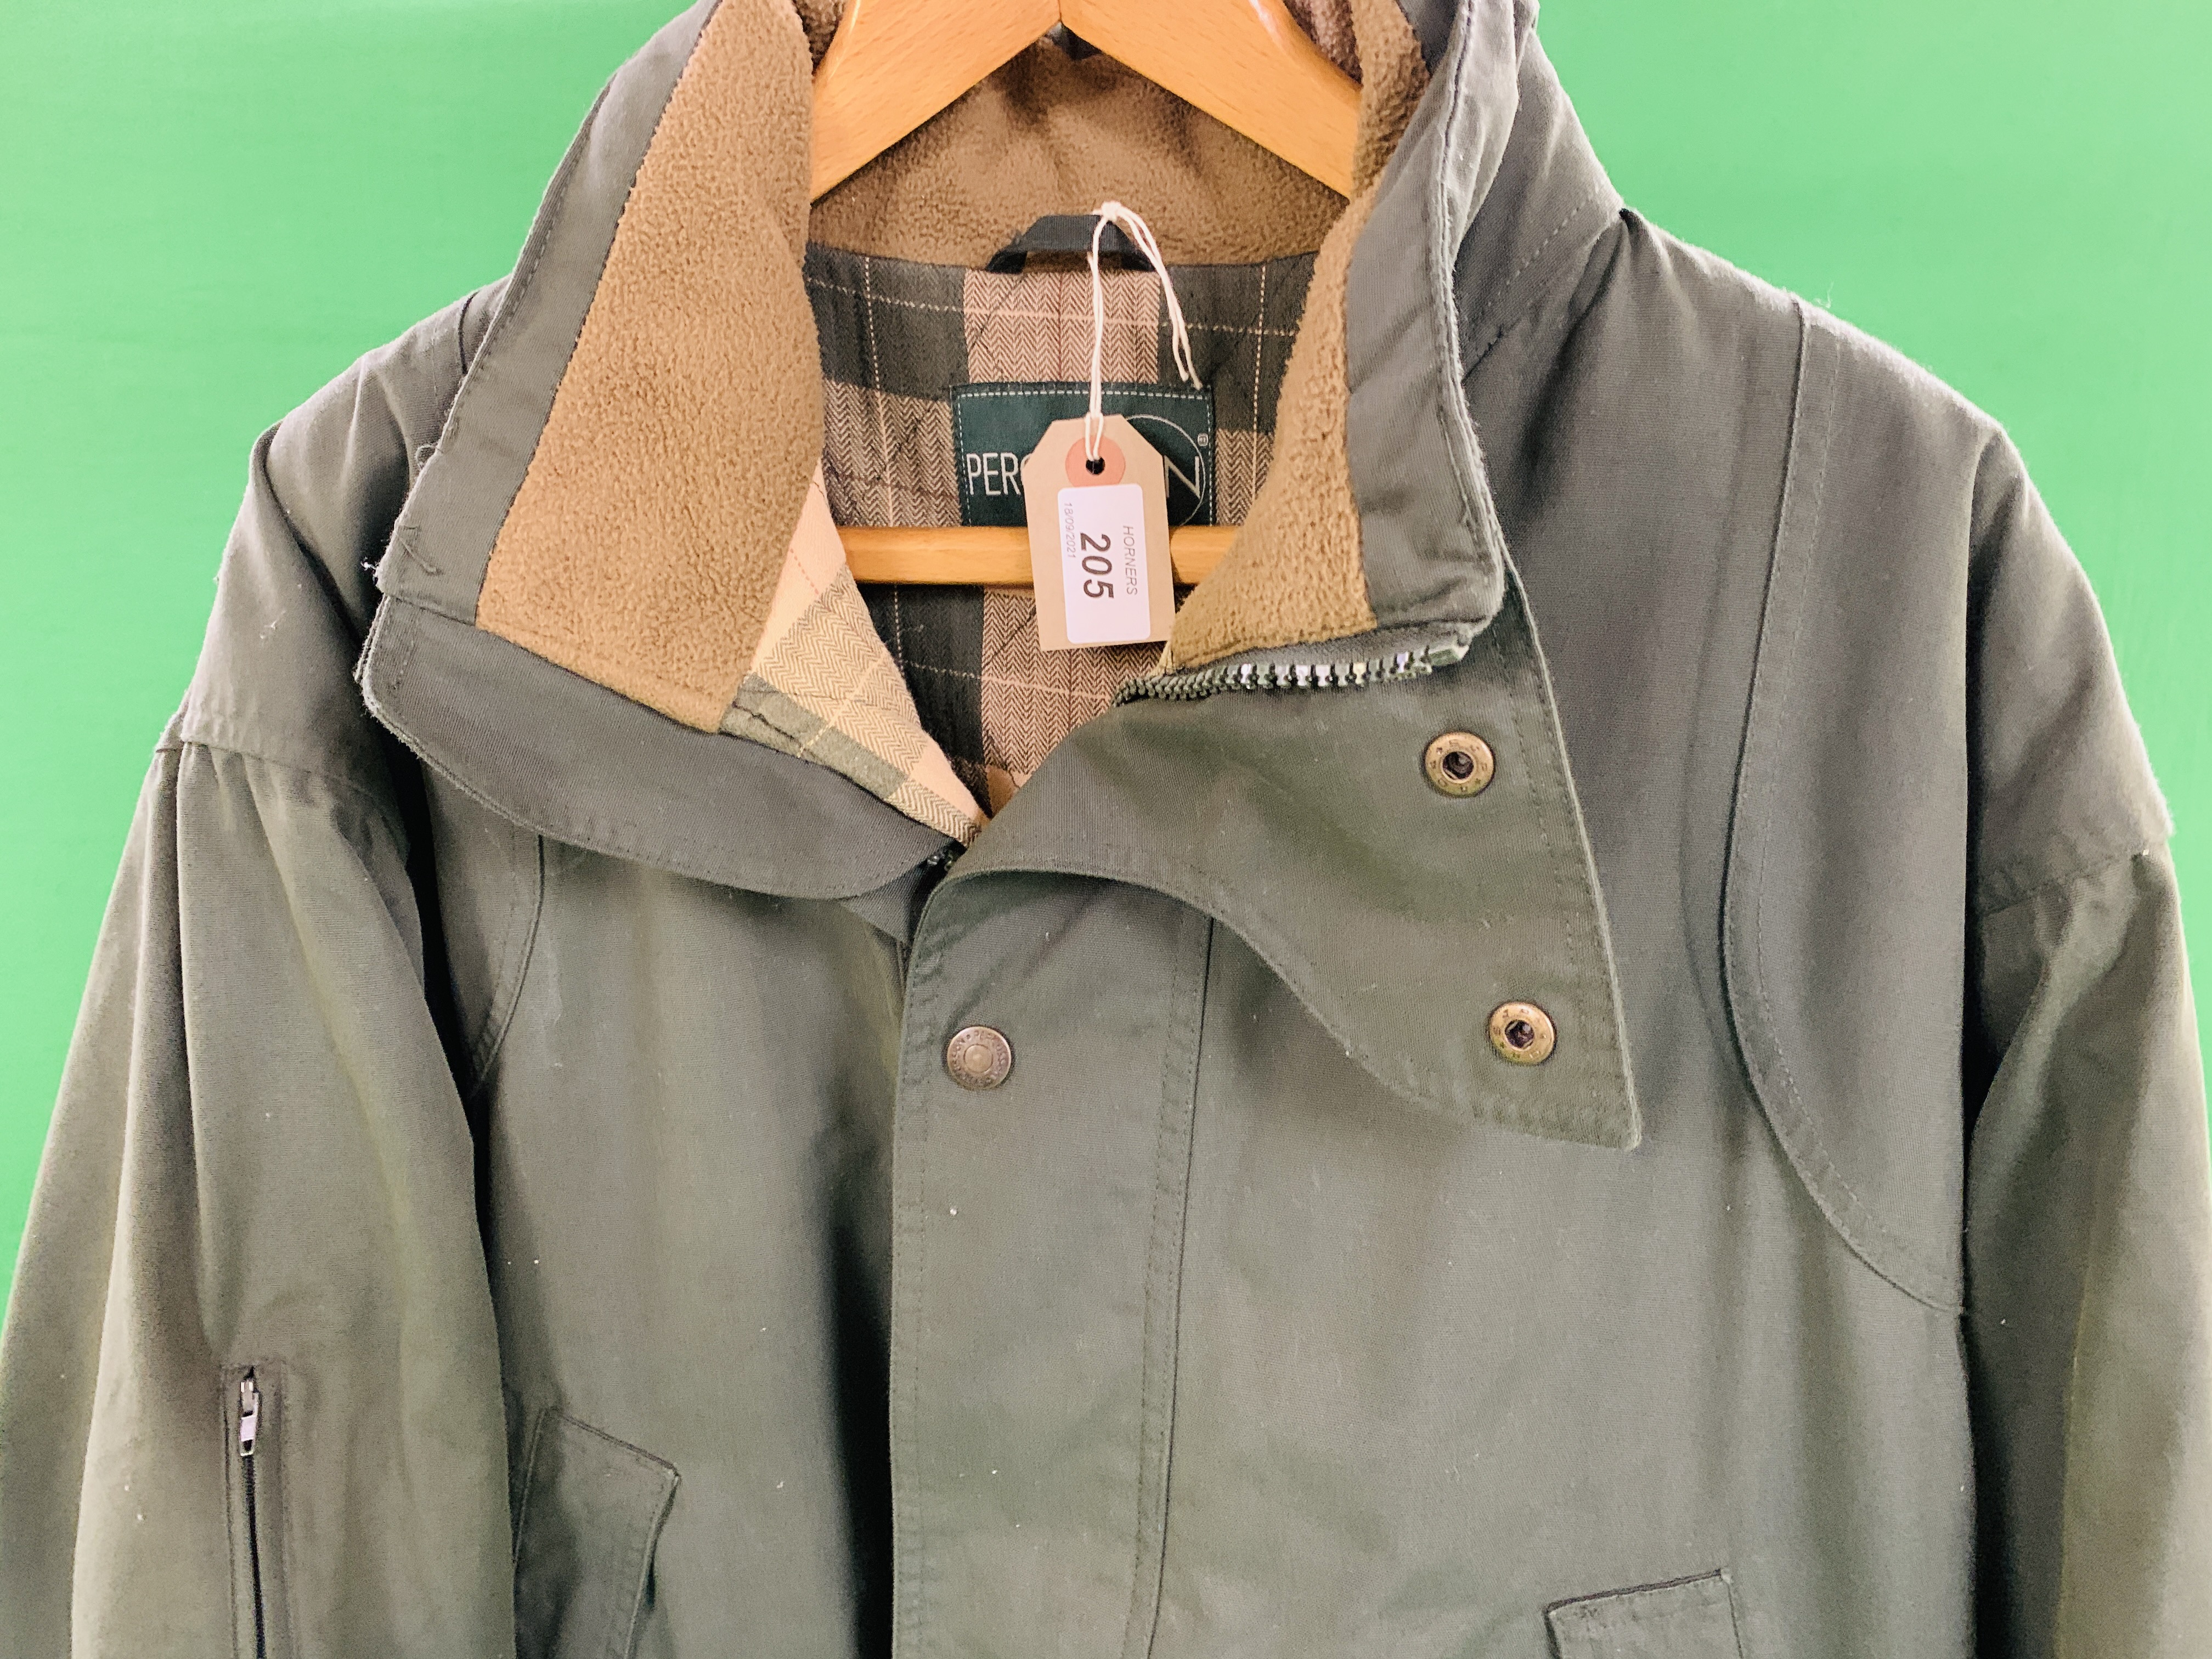 A PERCUSSION XXXL OUTDOOR JACKET - Image 2 of 3